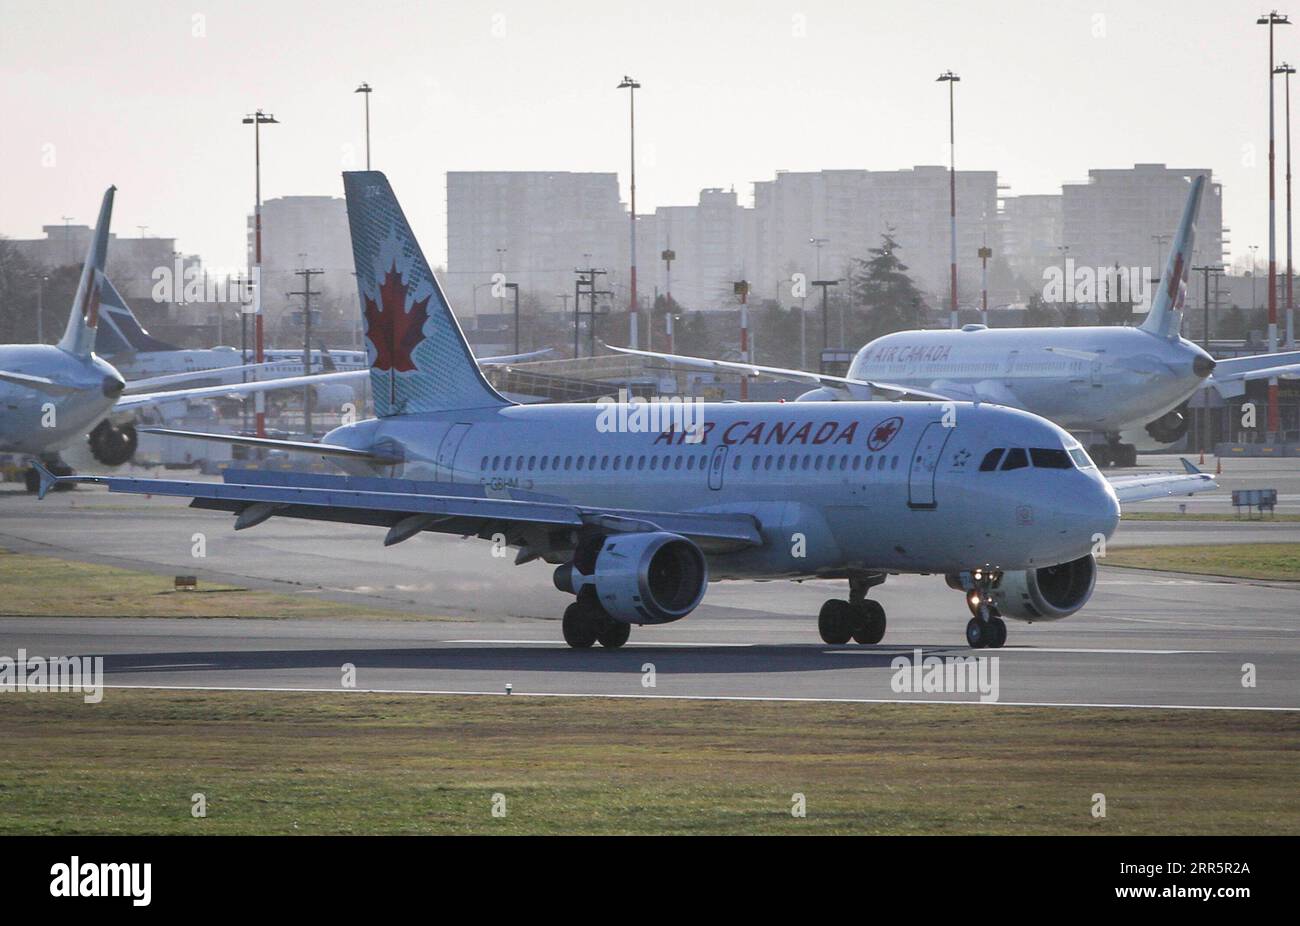 210113 -- RICHMOND CANADA, Jan. 13, 2021 -- Air Canada aircrafts are seen on the runway of Vancouver International Airport in Richmond, British Columbia, Canada, Jan. 13, 2021. Air Canada announced on Wednesday that it is laying off about 1,700 employees due to official travel restrictions against the rampaging COVID-19 pandemic. Photo by /Xinhua CANADA-RICHMOND-COVID-19-AIR CANADA-LAYOFF LiangxSen PUBLICATIONxNOTxINxCHN Stock Photo